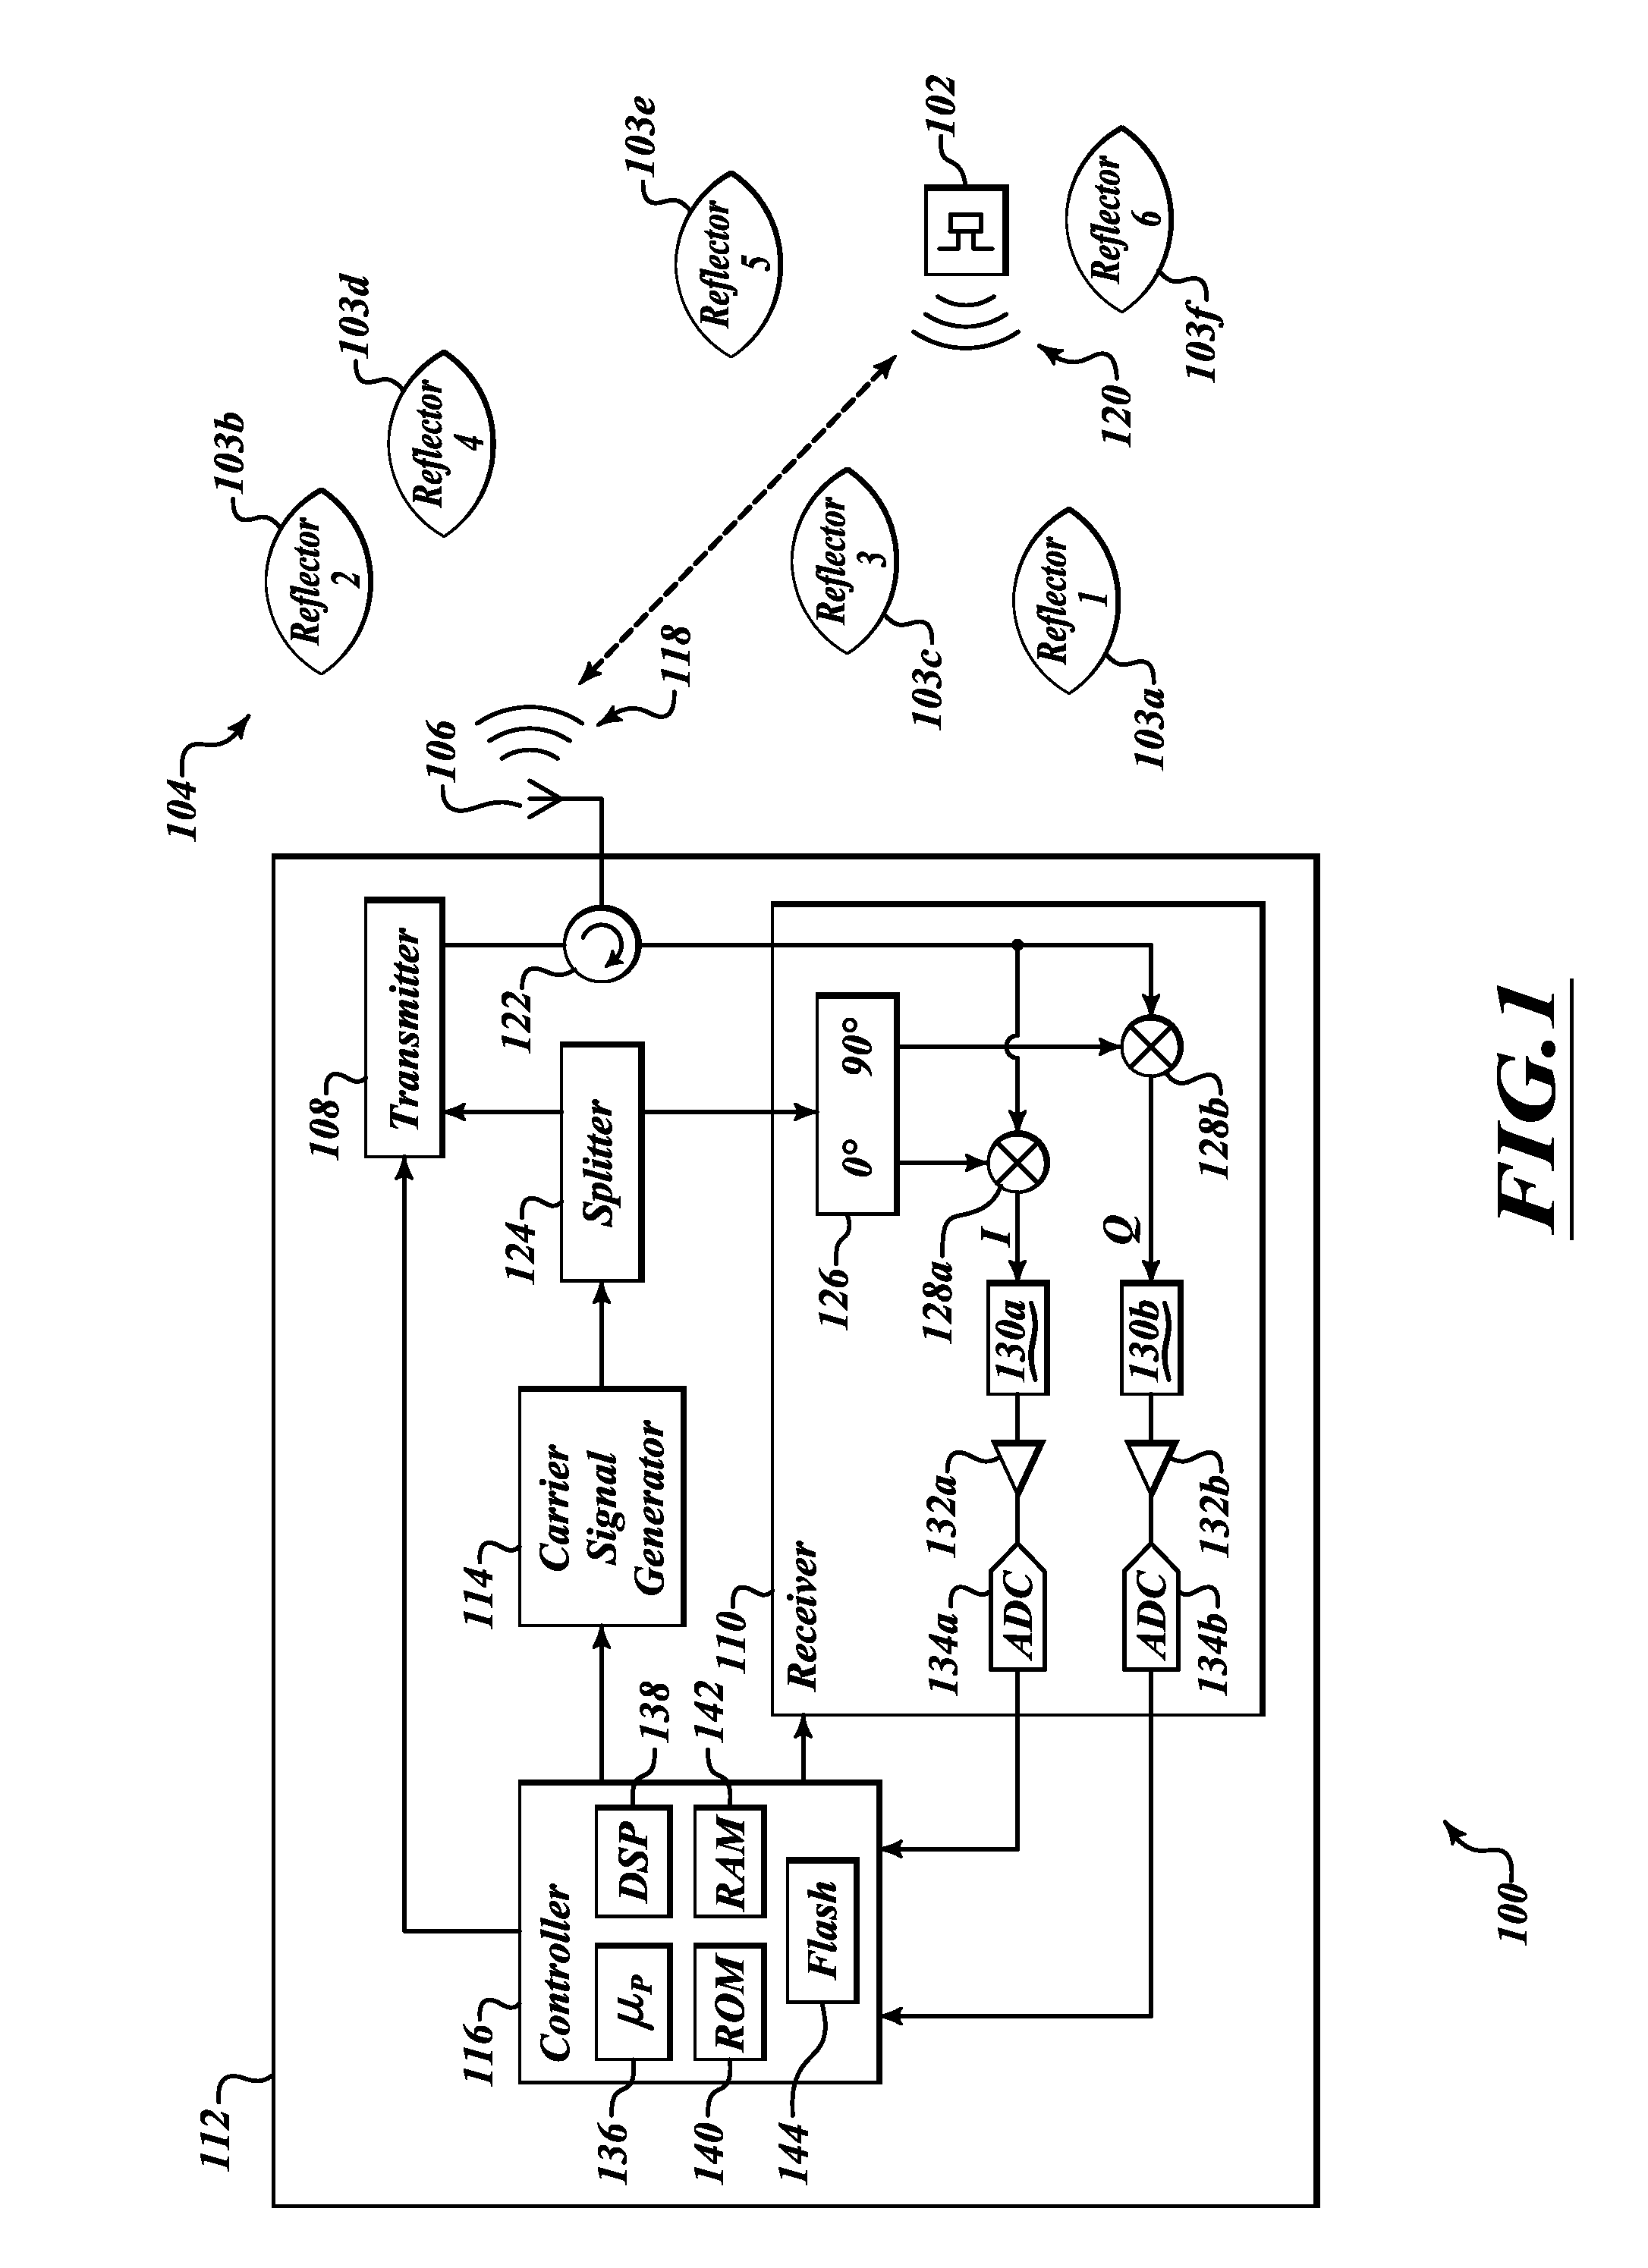 Method and apparatus to mitigate multipath in RFID